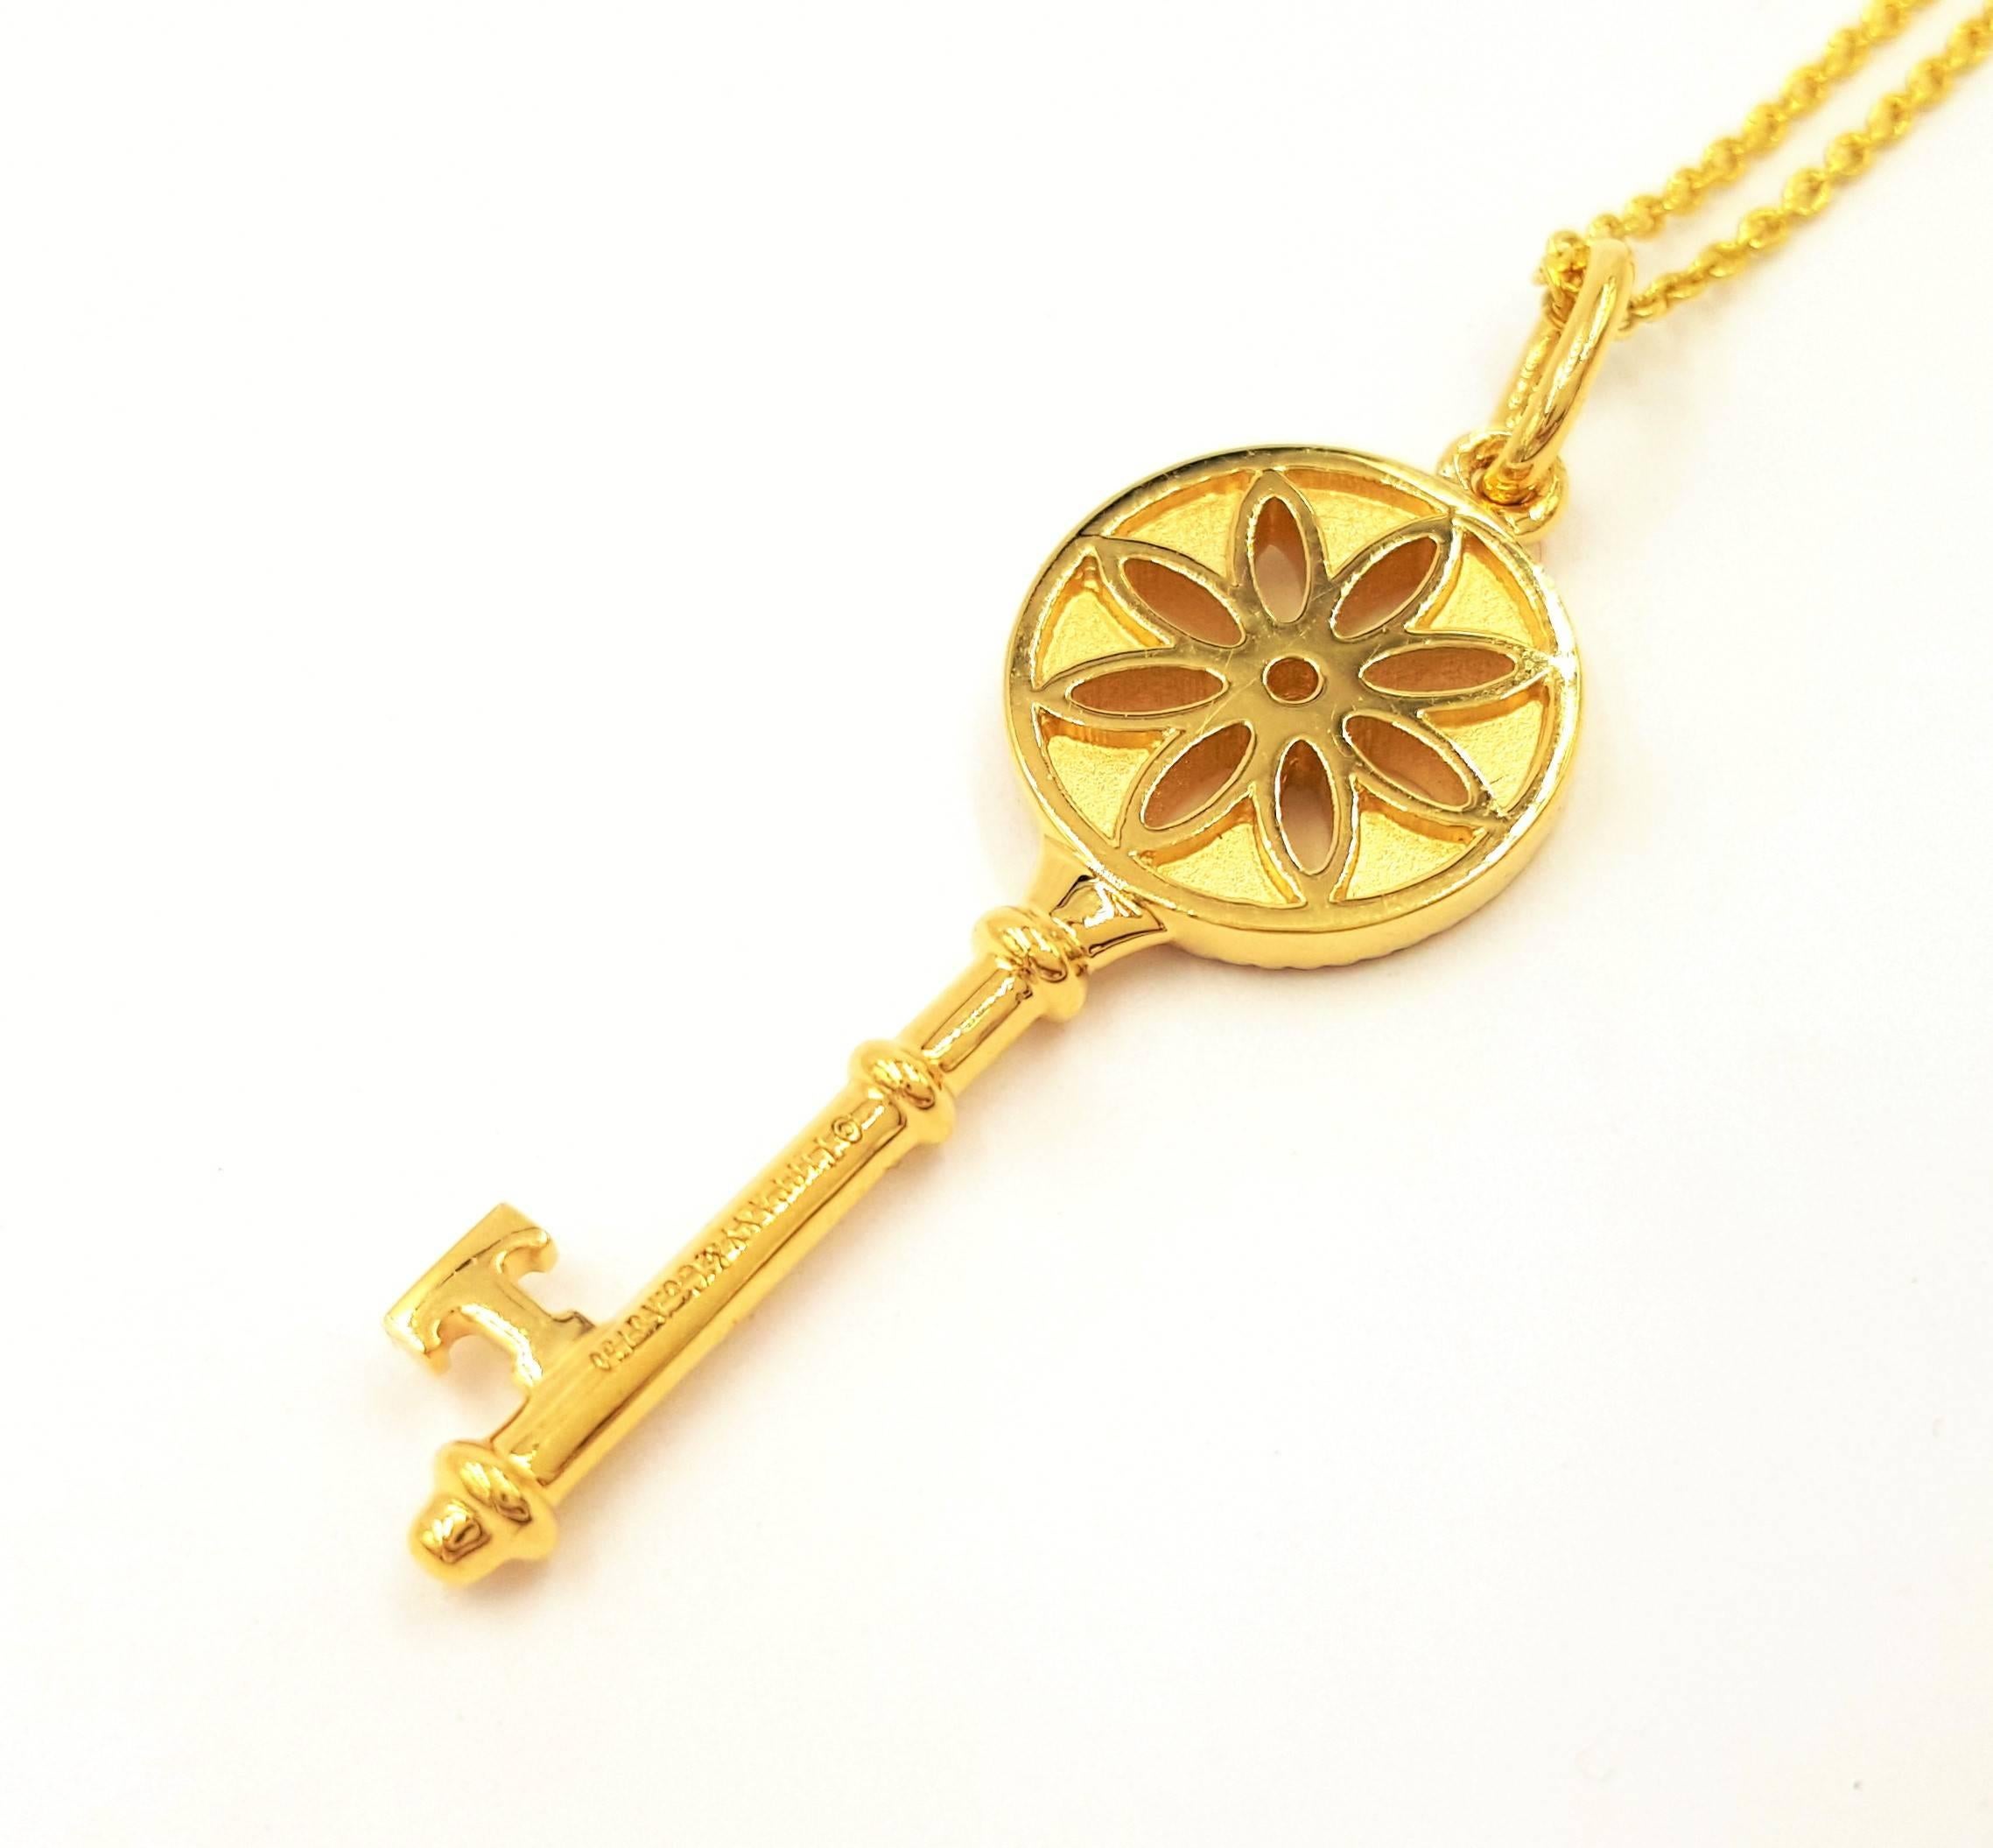 Women's Signed Tiffany & Co. Diamond Featured in A Gold Daisy Key Pendant